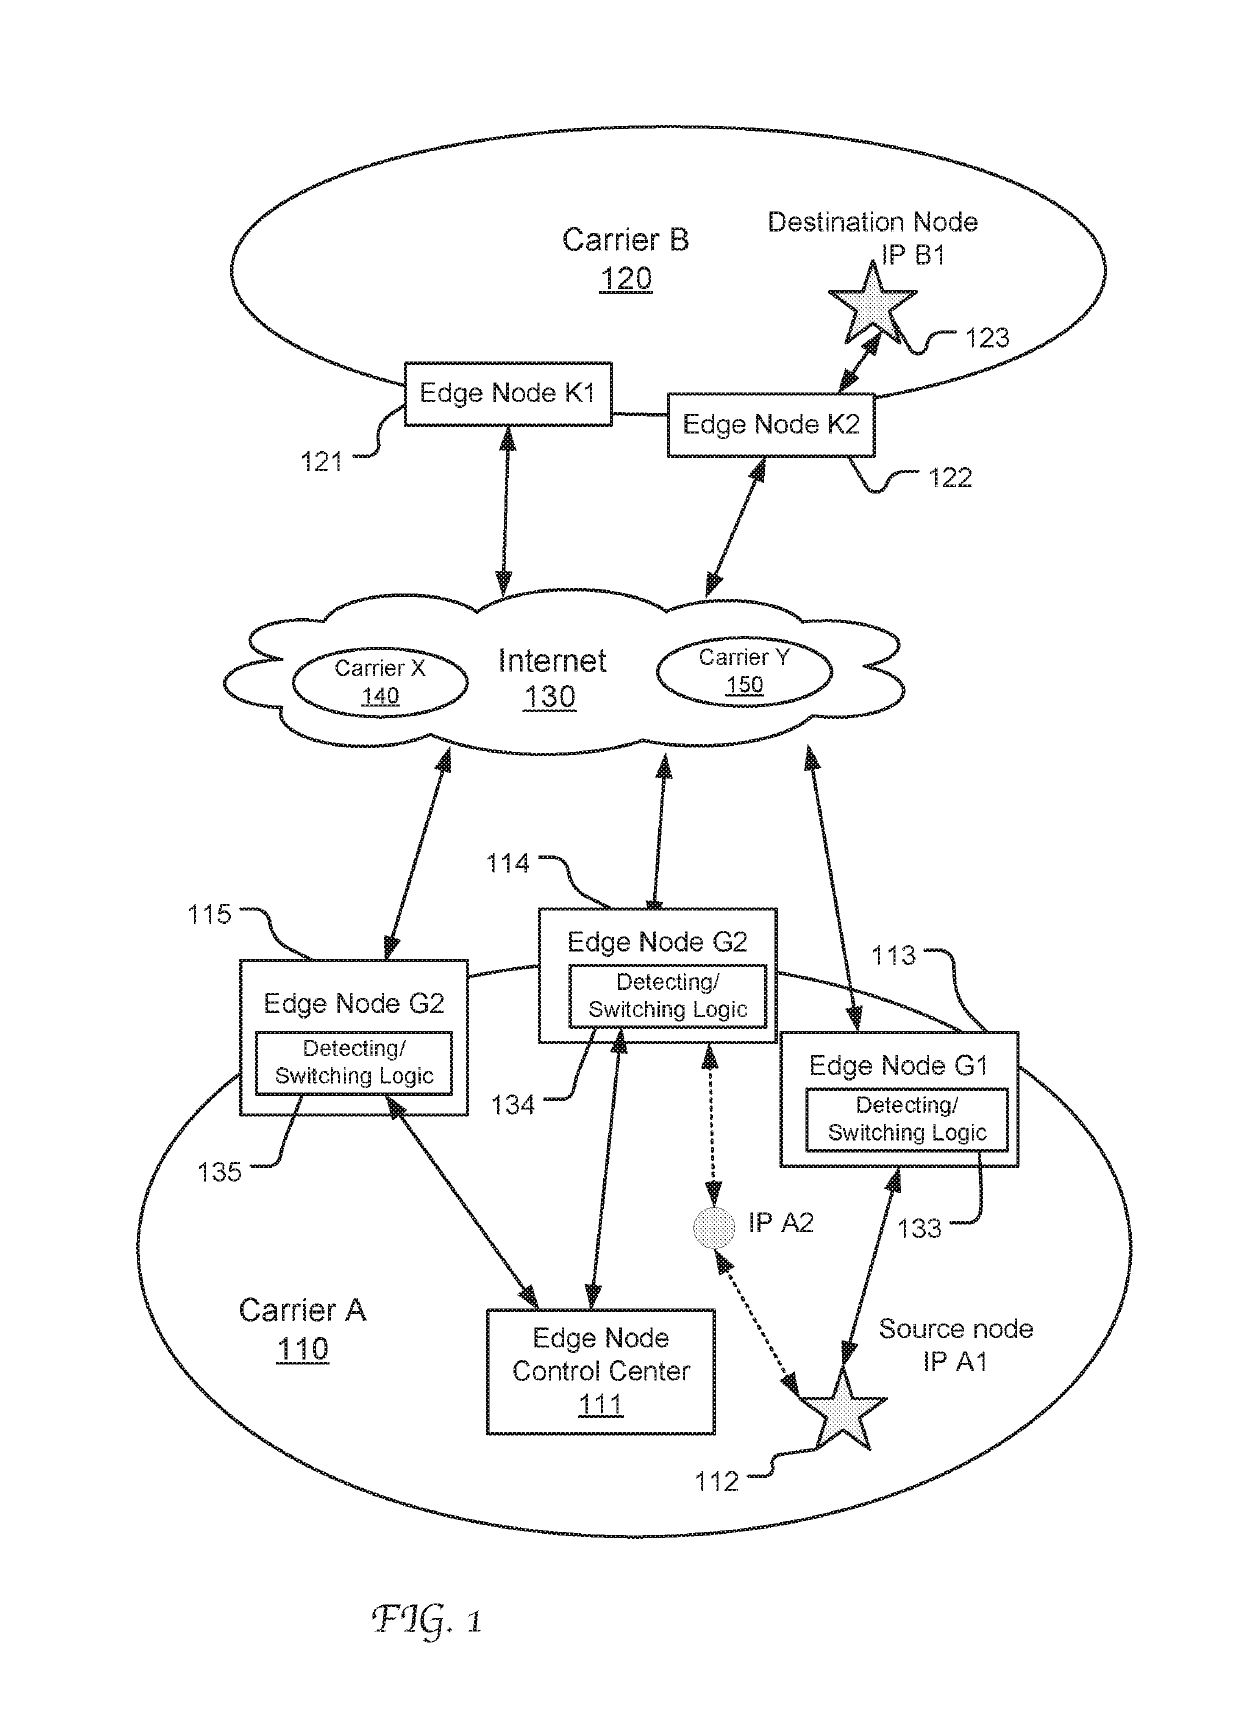 Dynamic switching between edge nodes in autonomous network system